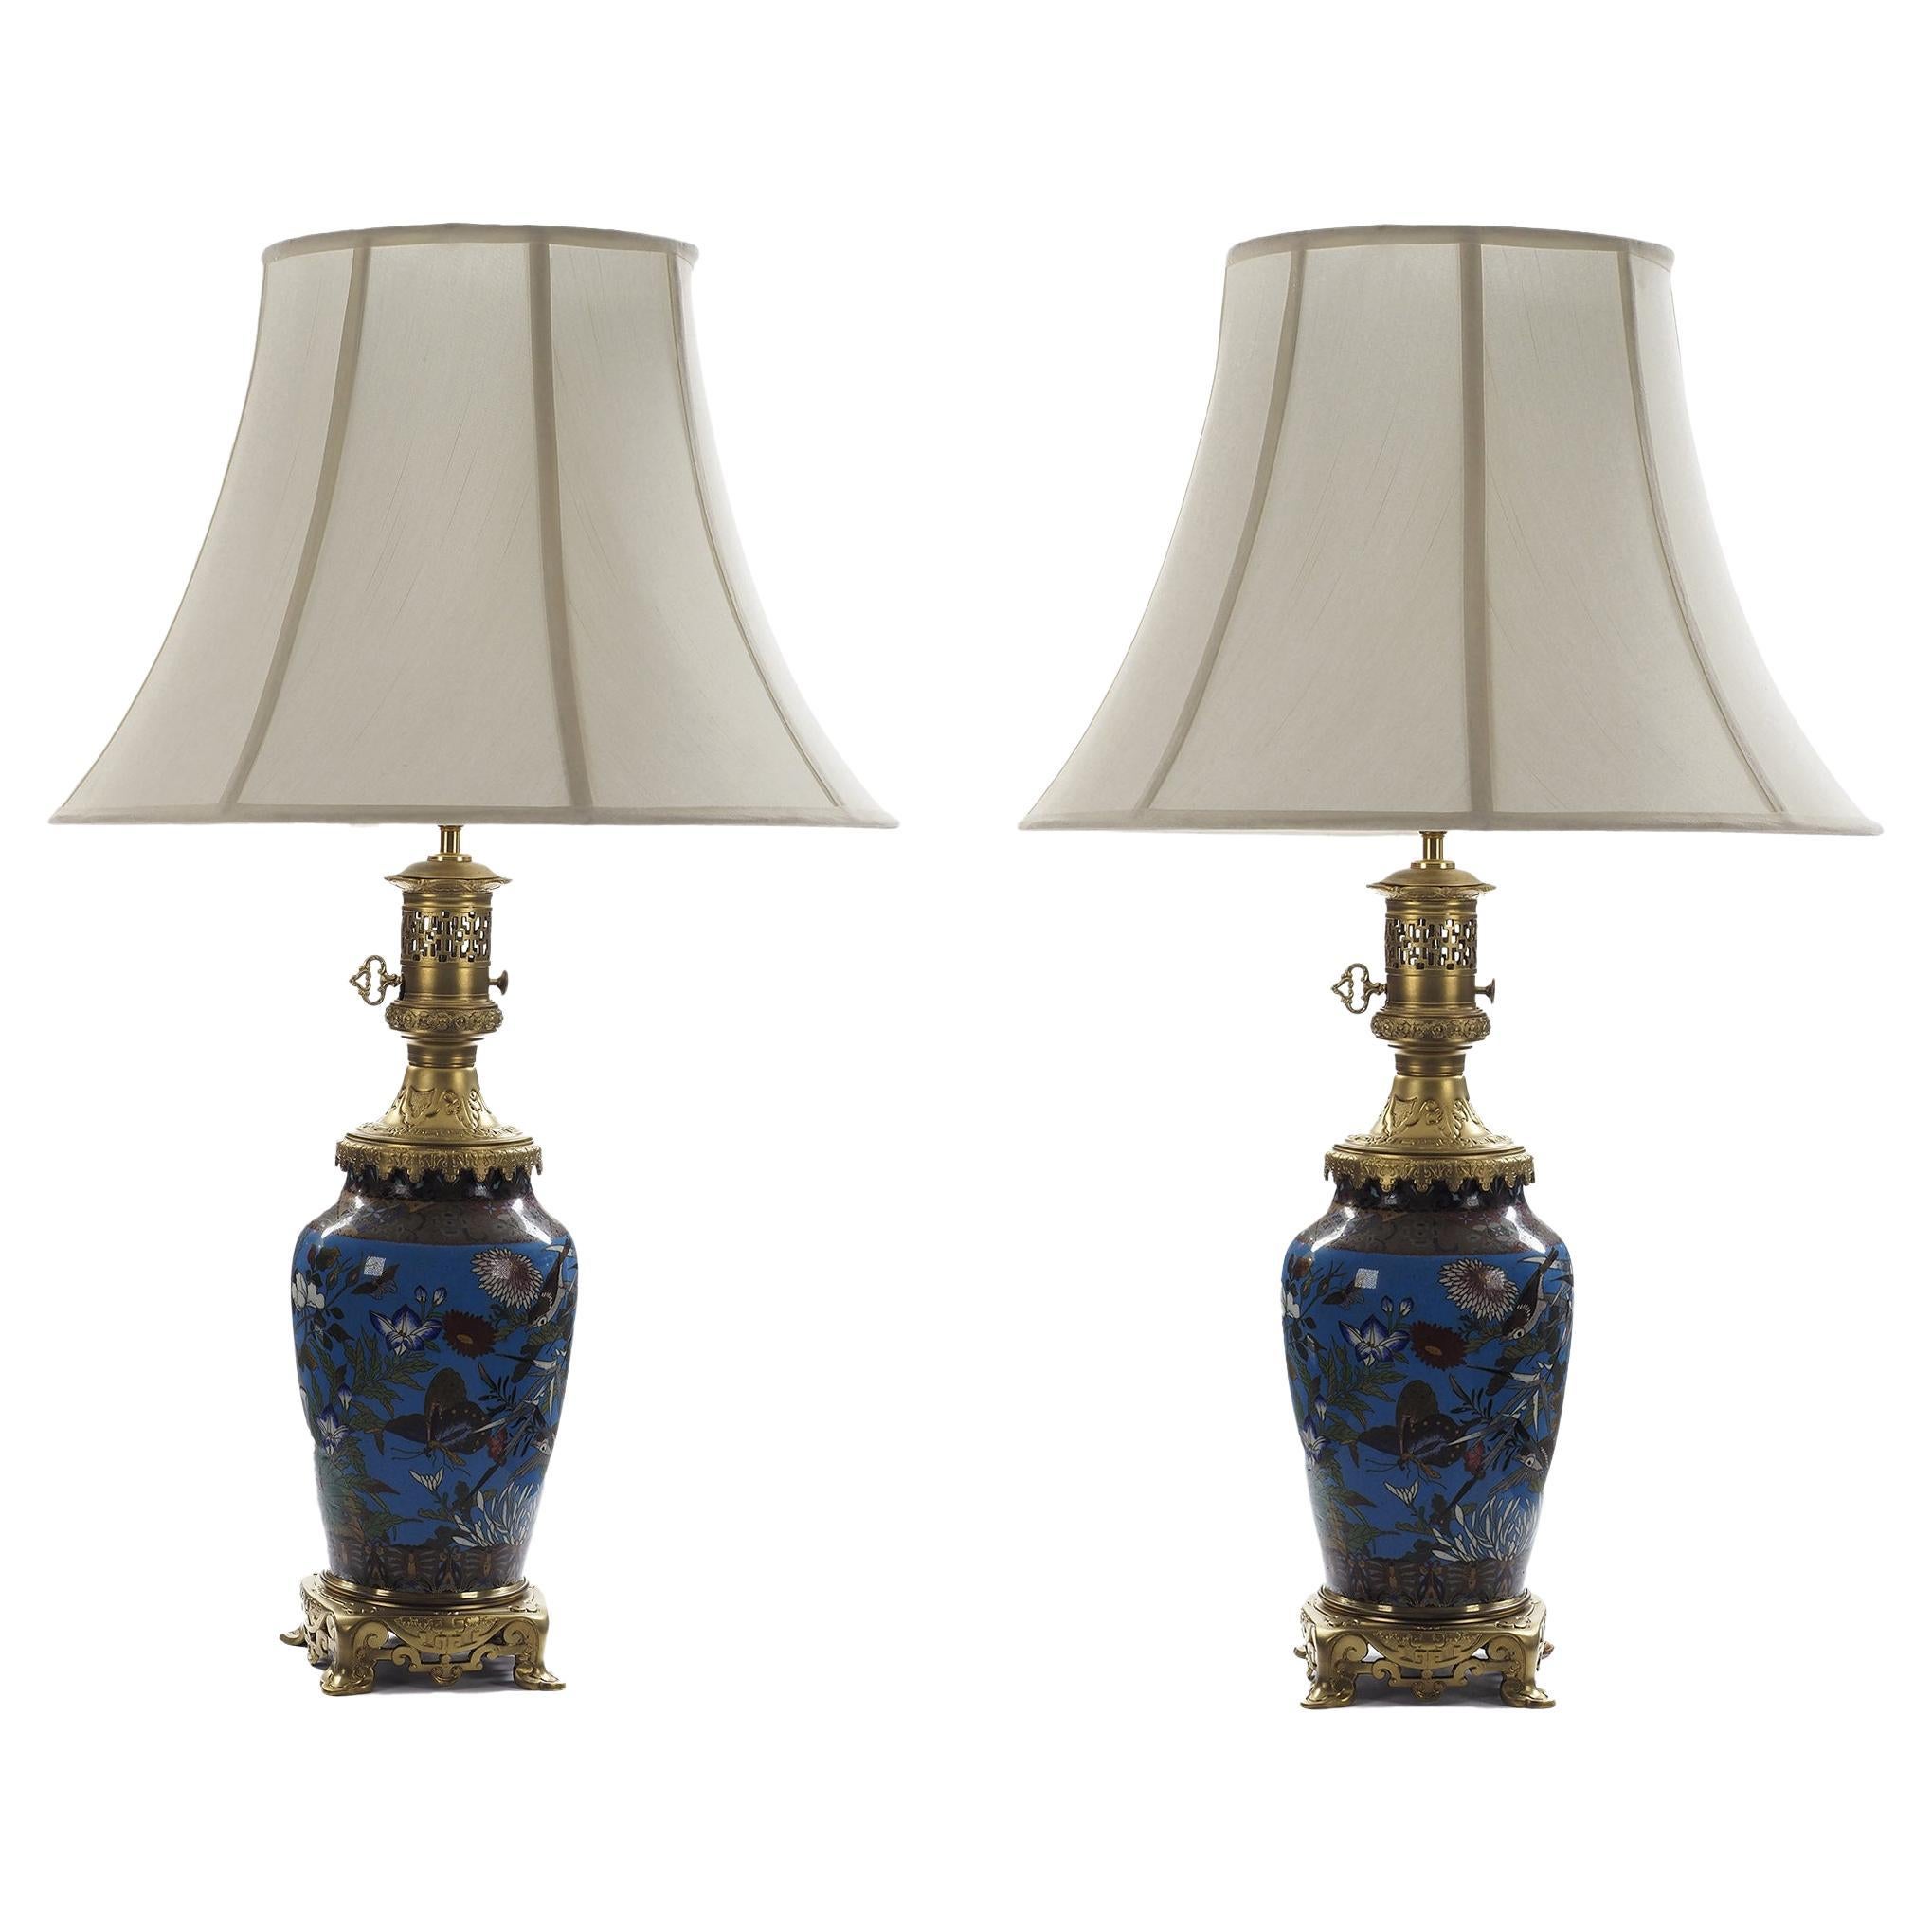 Pair of Late 19th Century Chinese Cloisonné Enamel Lamps